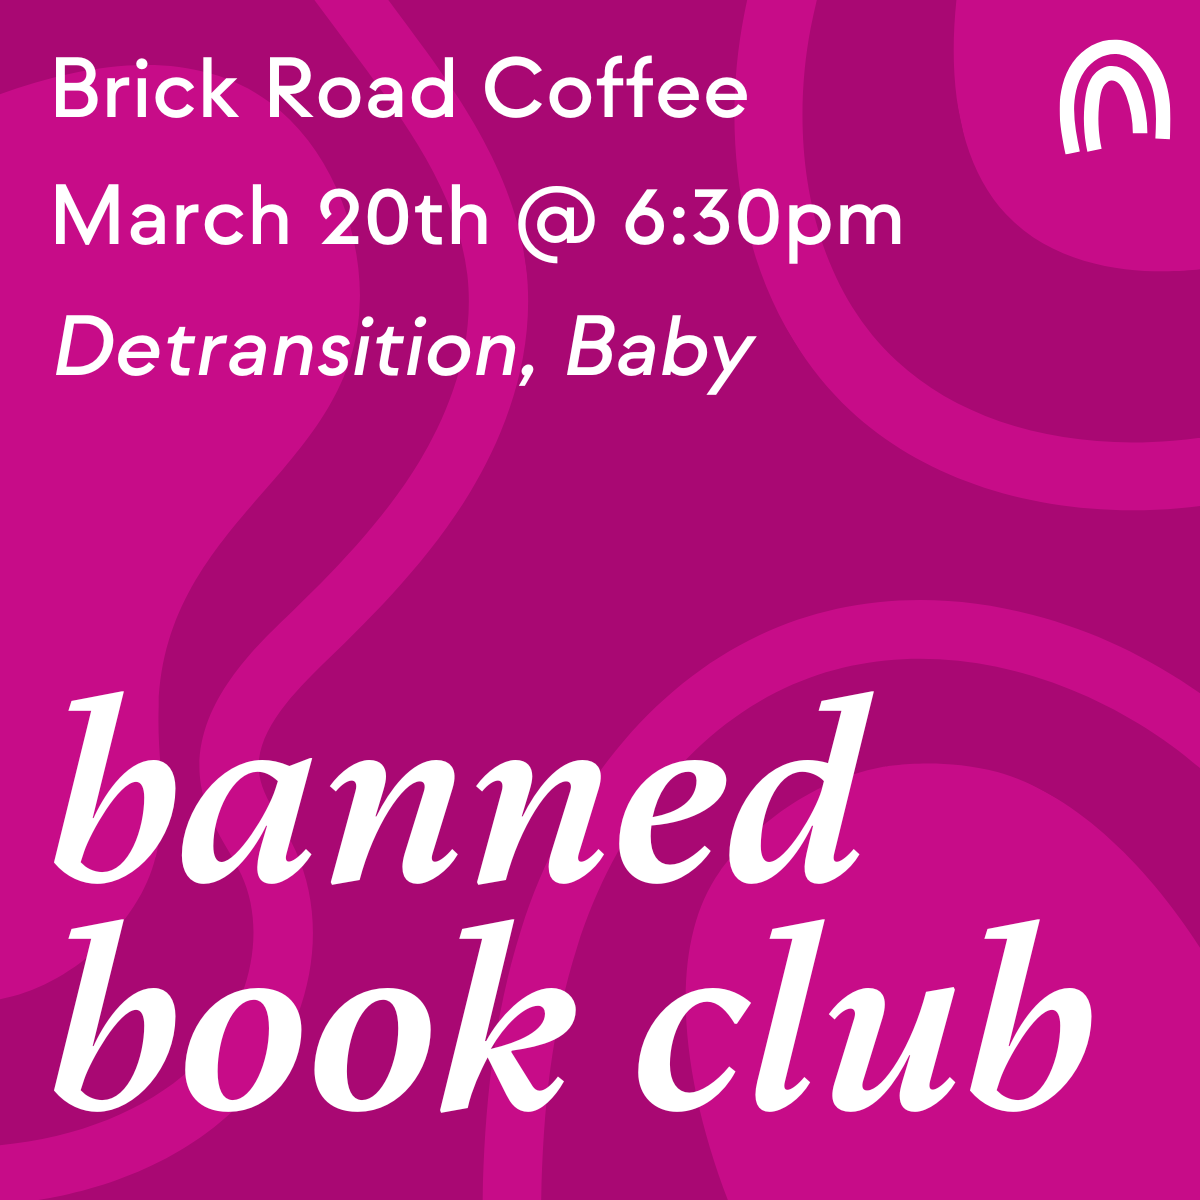 Banned Book Club. Brick Road Coffee. March 20th @ 6:30pm. Detransition, Baby.